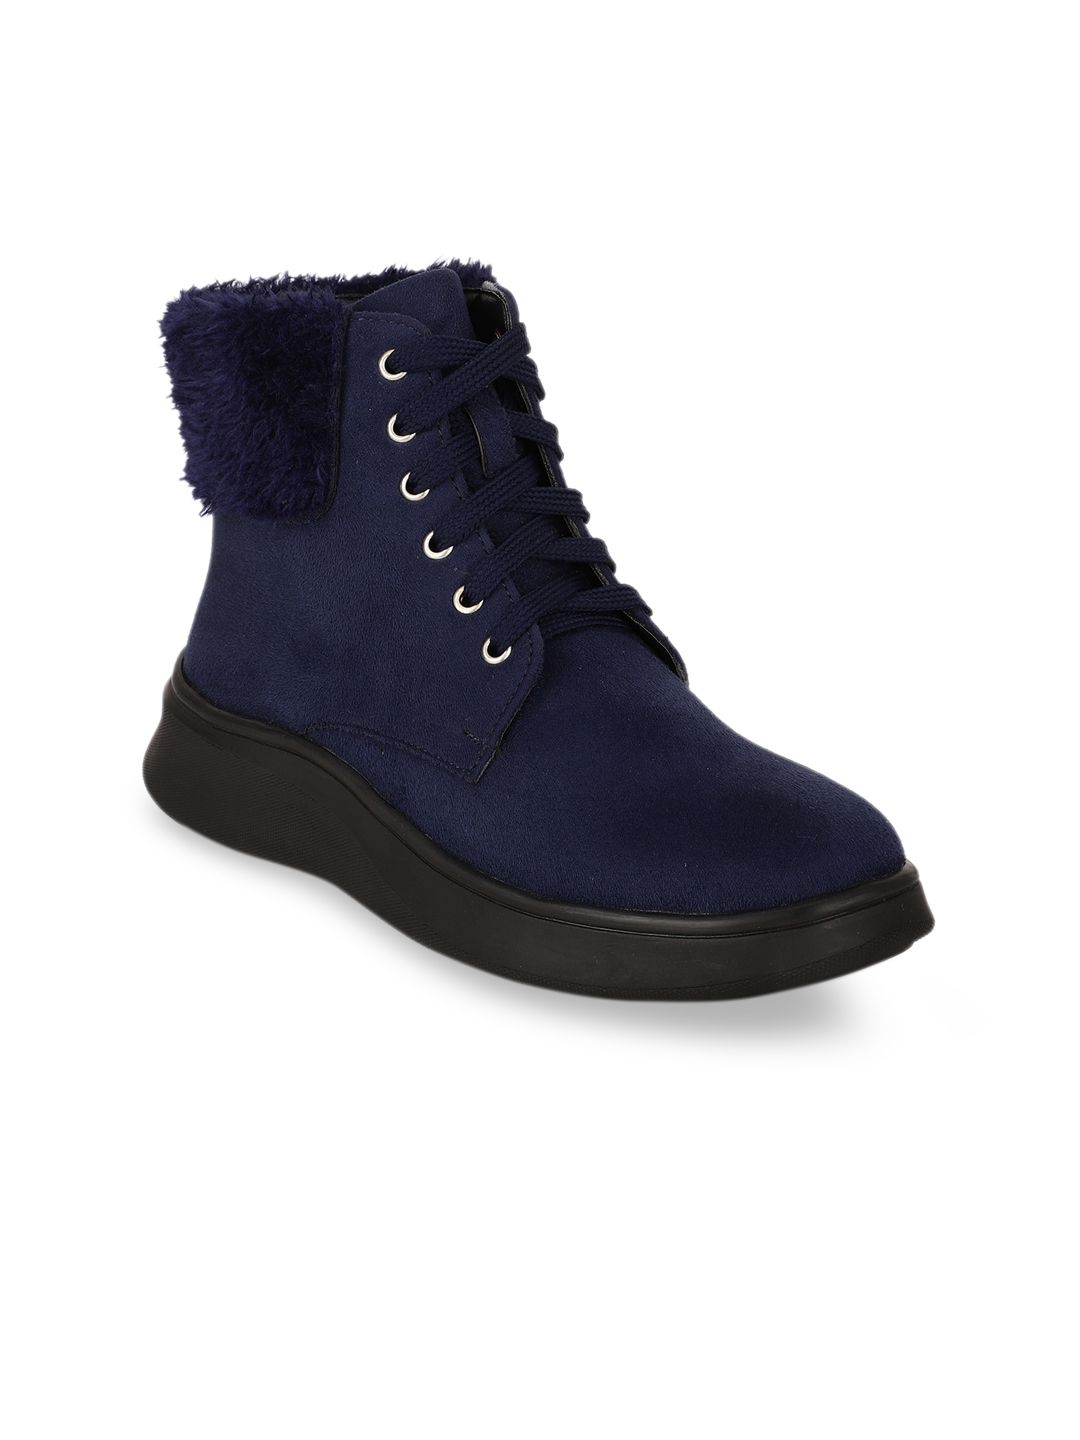 Bruno Manetti Navy Blue Suede Flatform Heeled Boots Price in India